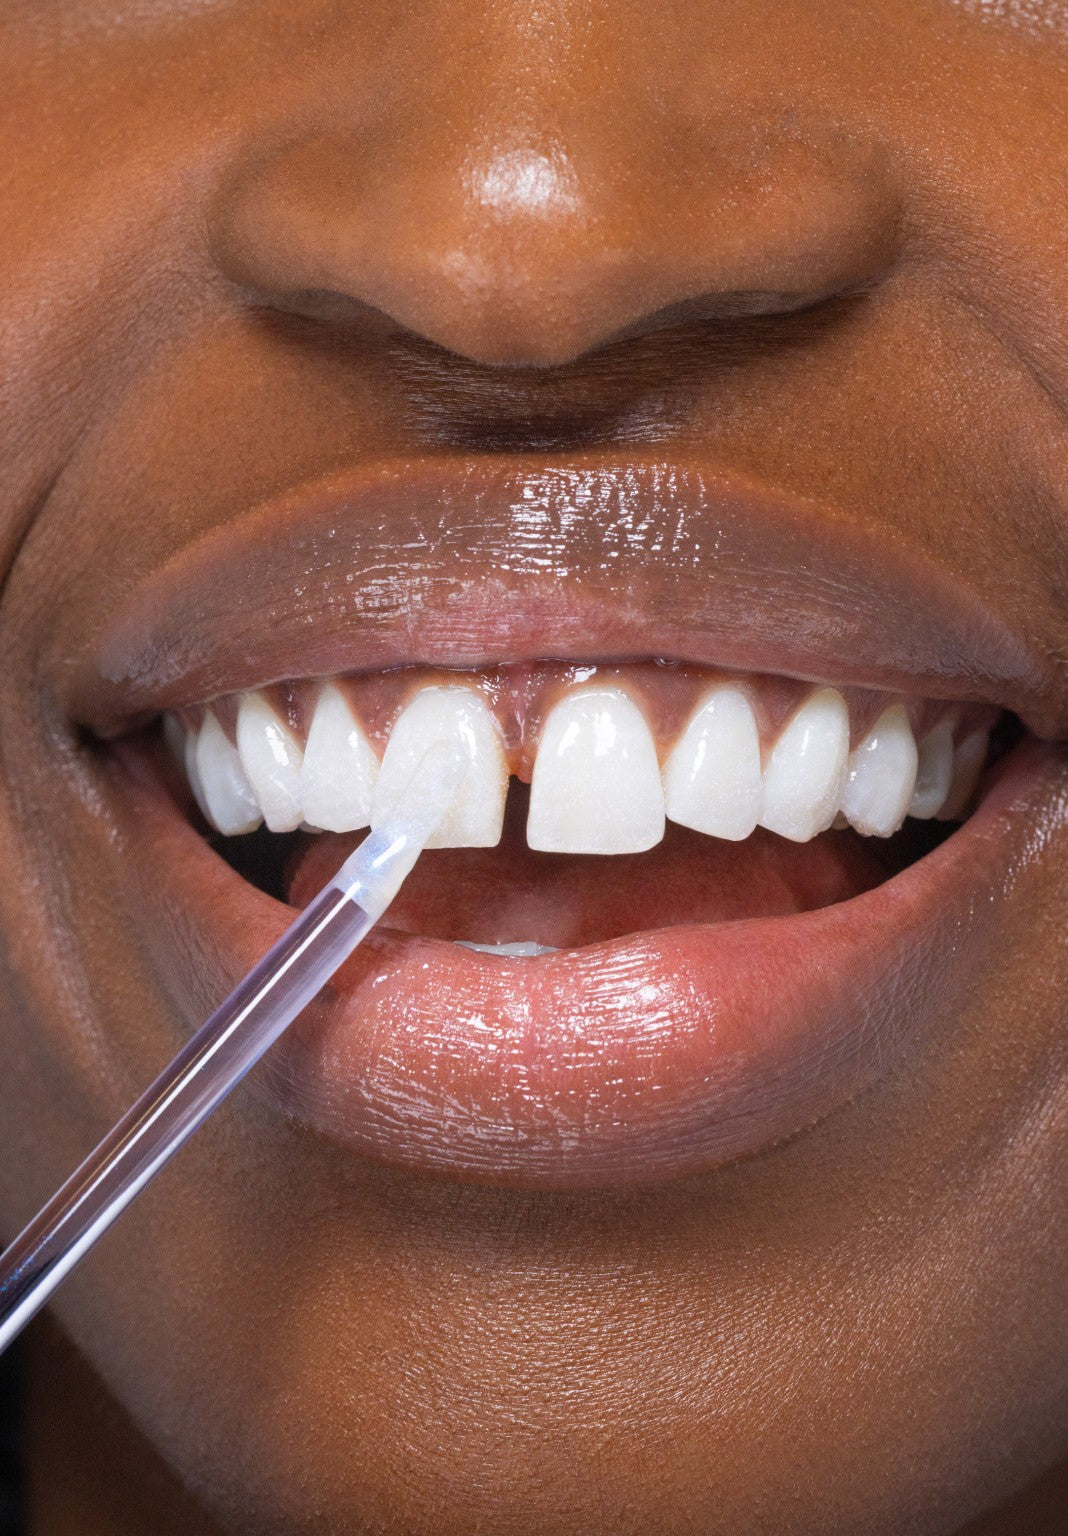 The $29 'magic' teeth whitening powder from HiSmile that works in